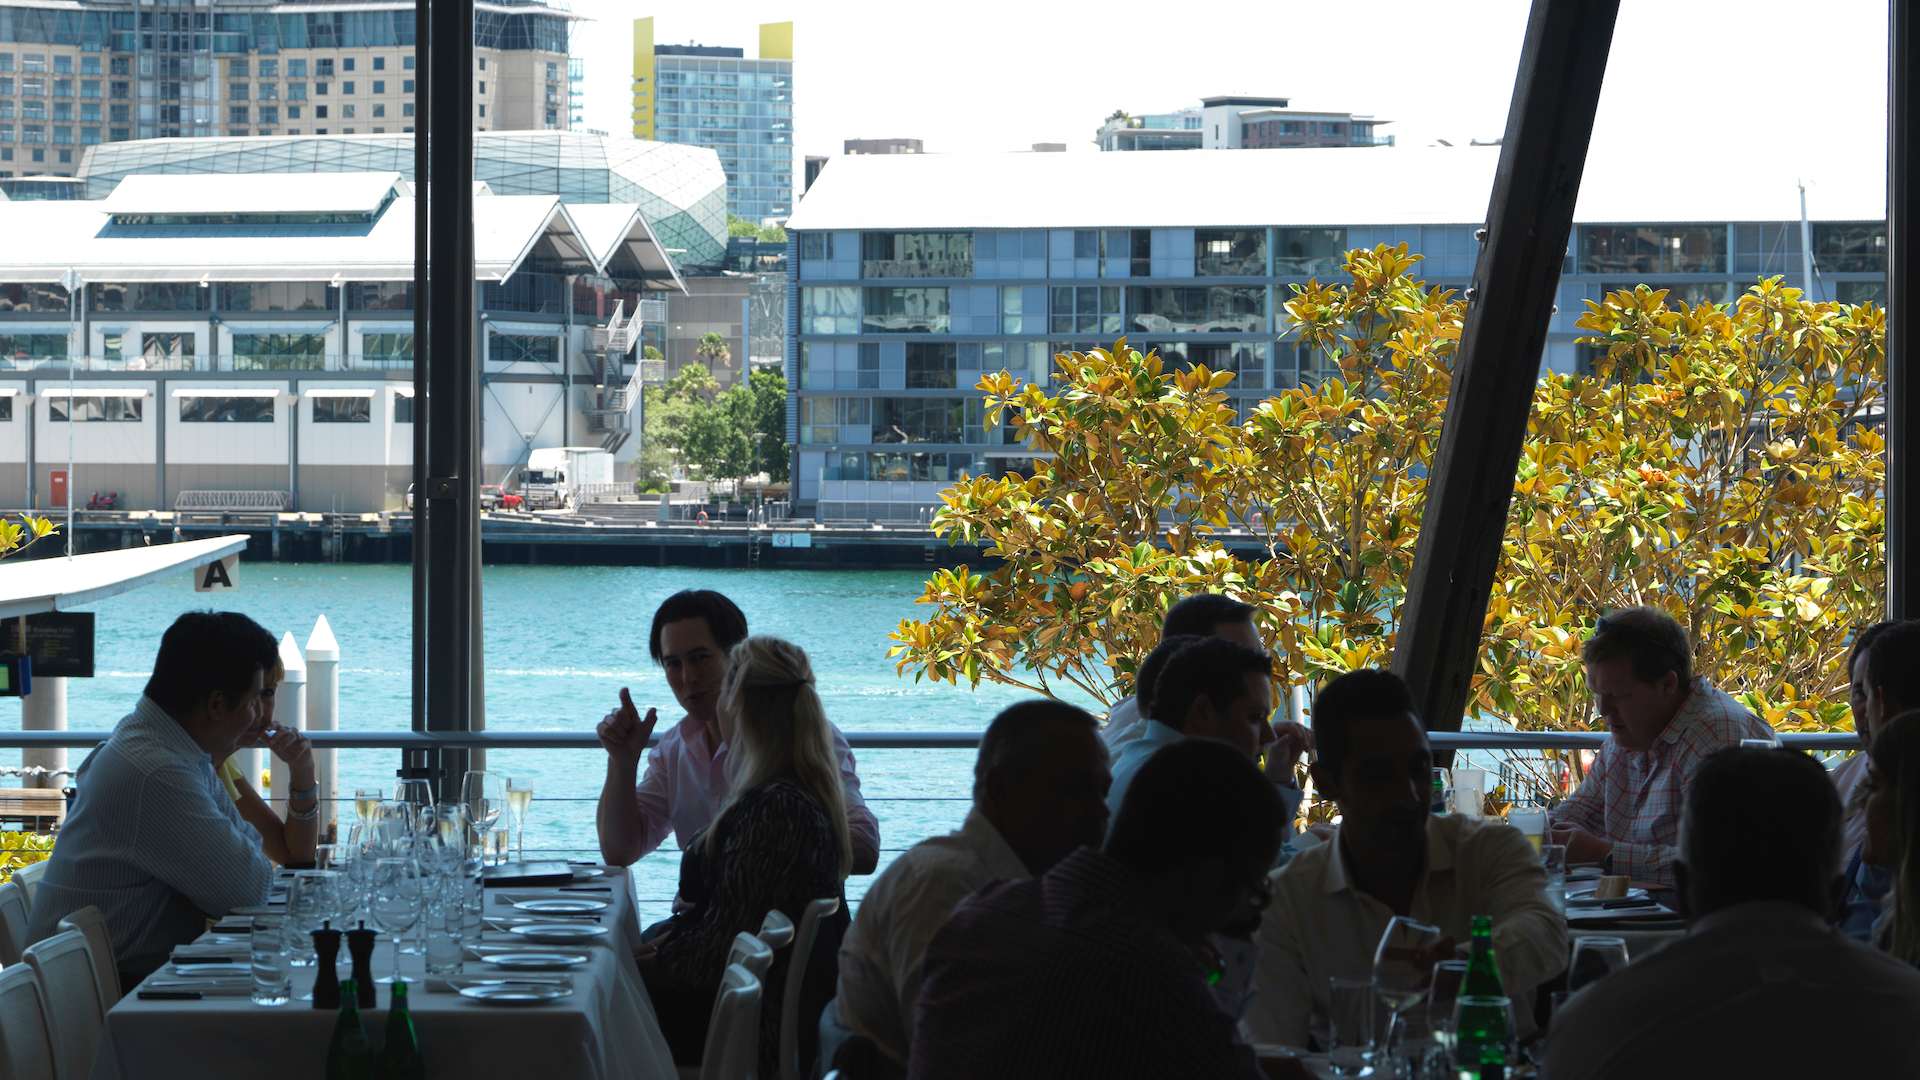 Valentine's Day at King Street Wharf